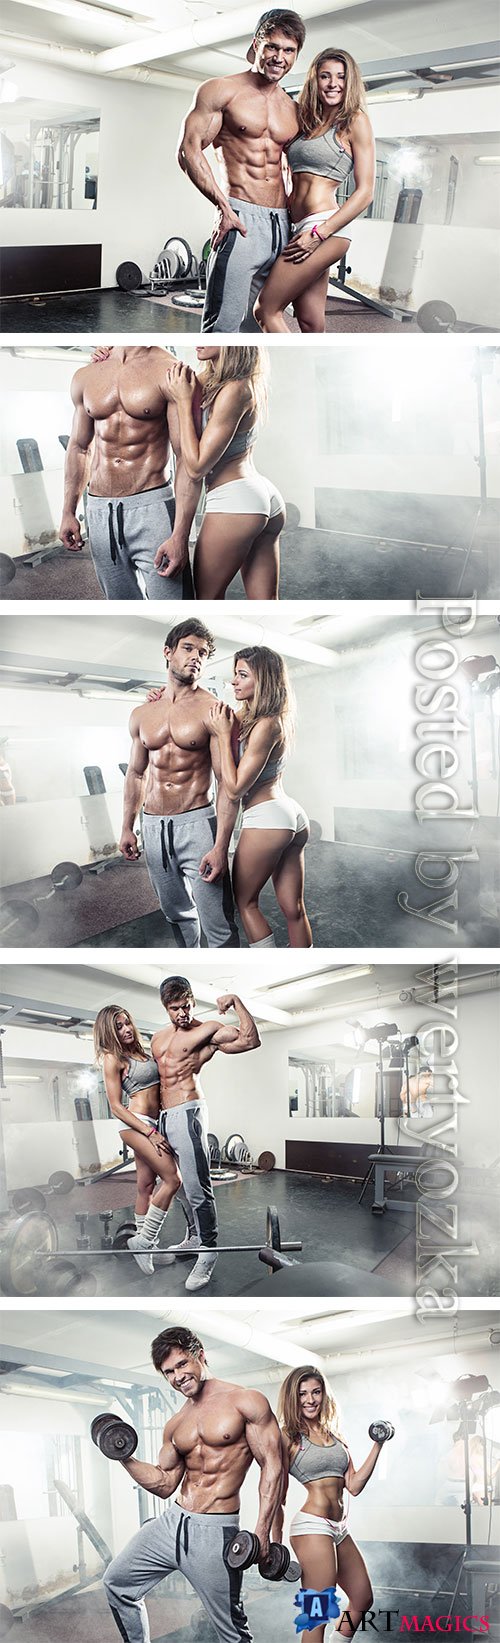 Girl and man in the gym